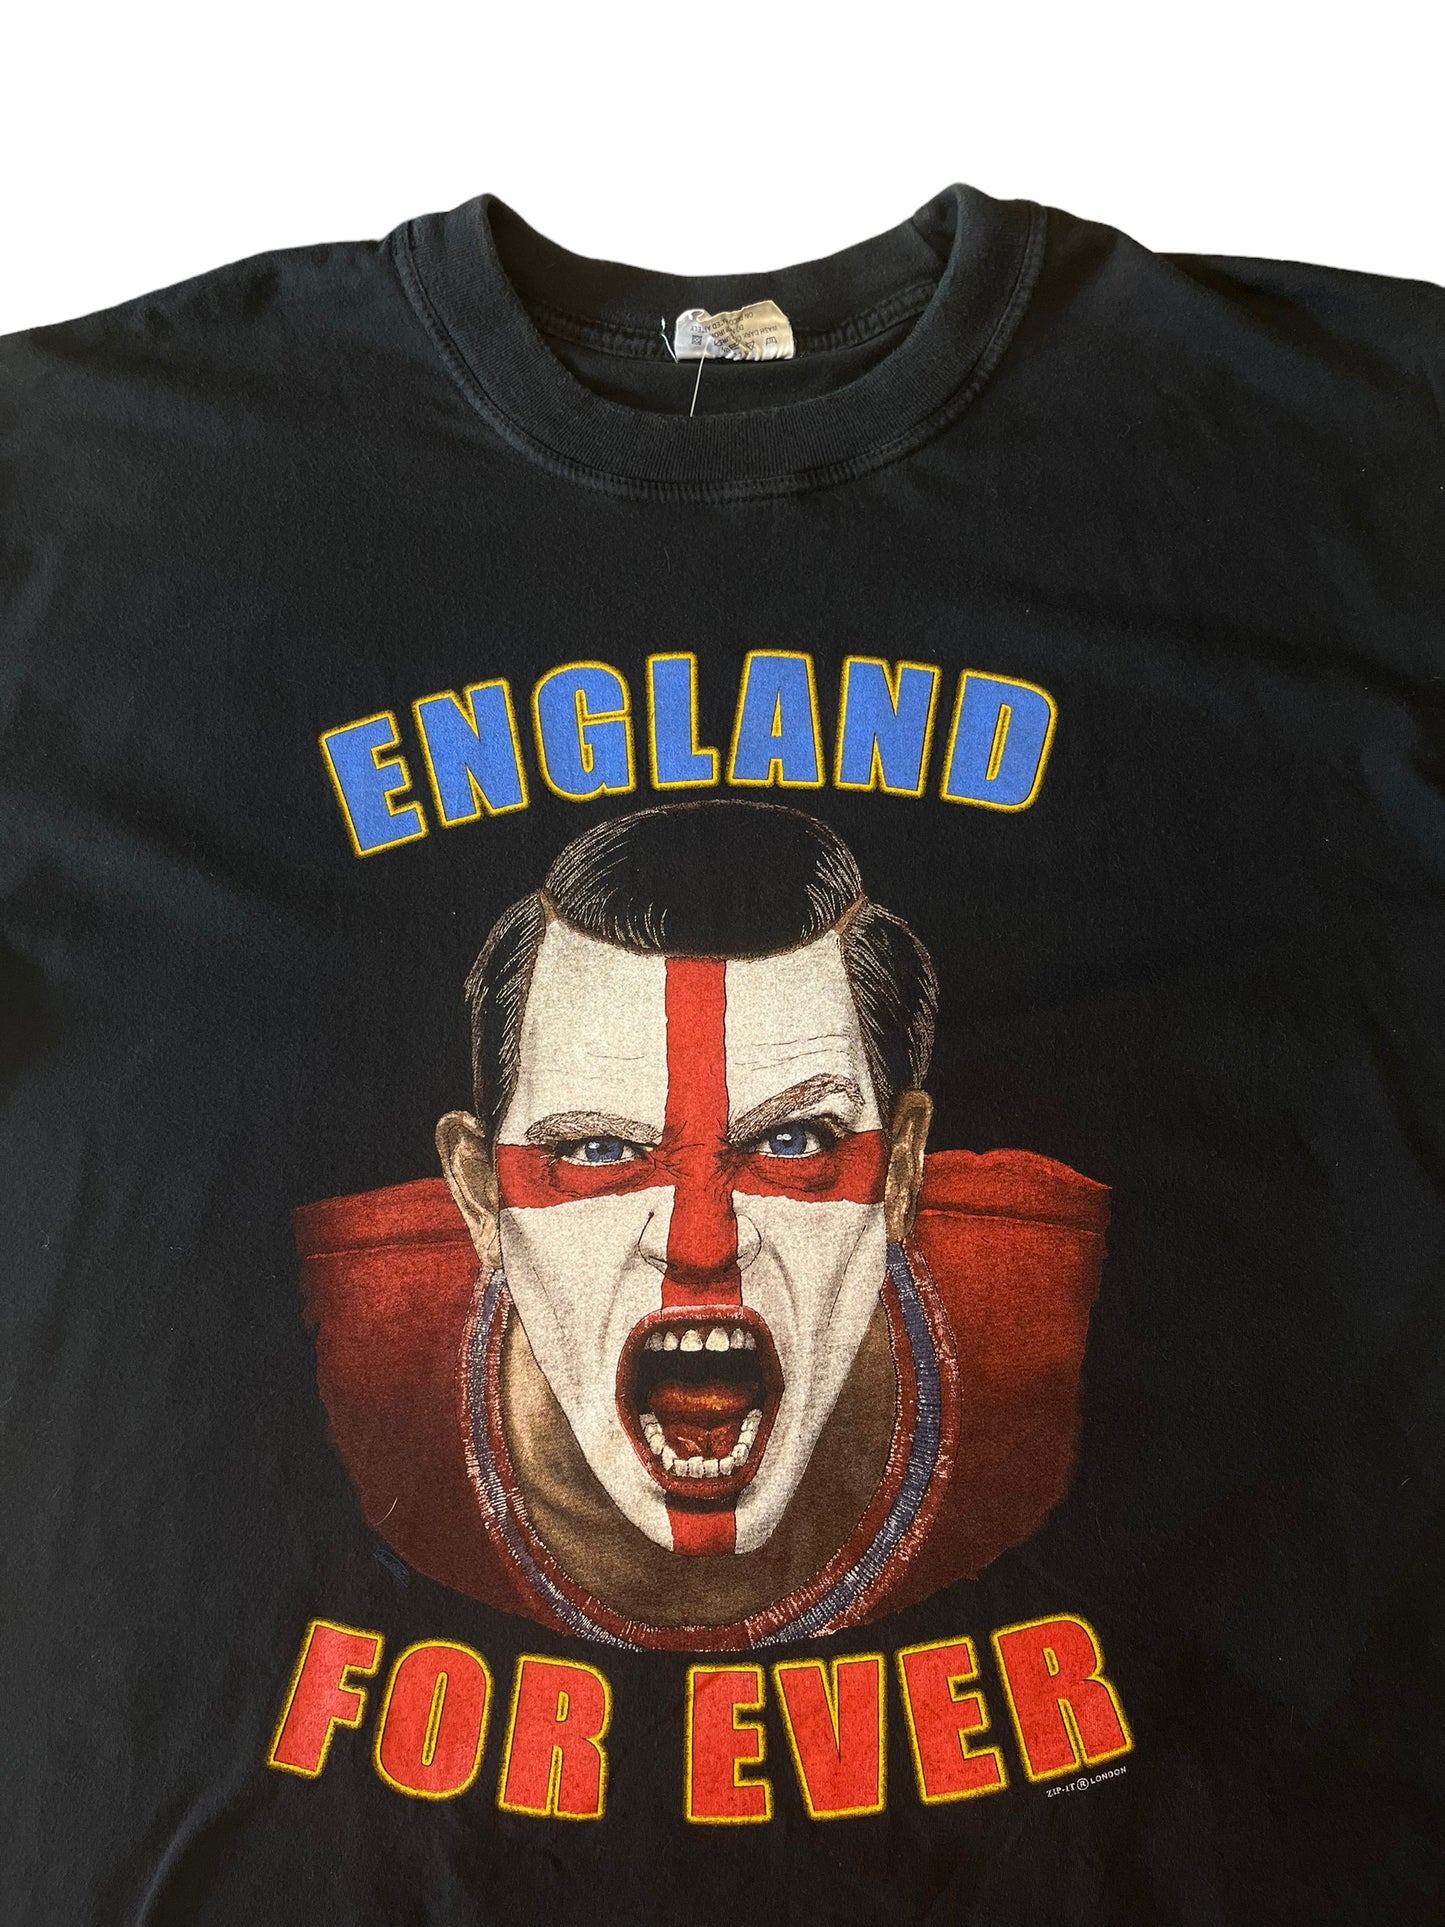 (XL) Vintage England Forever Tee